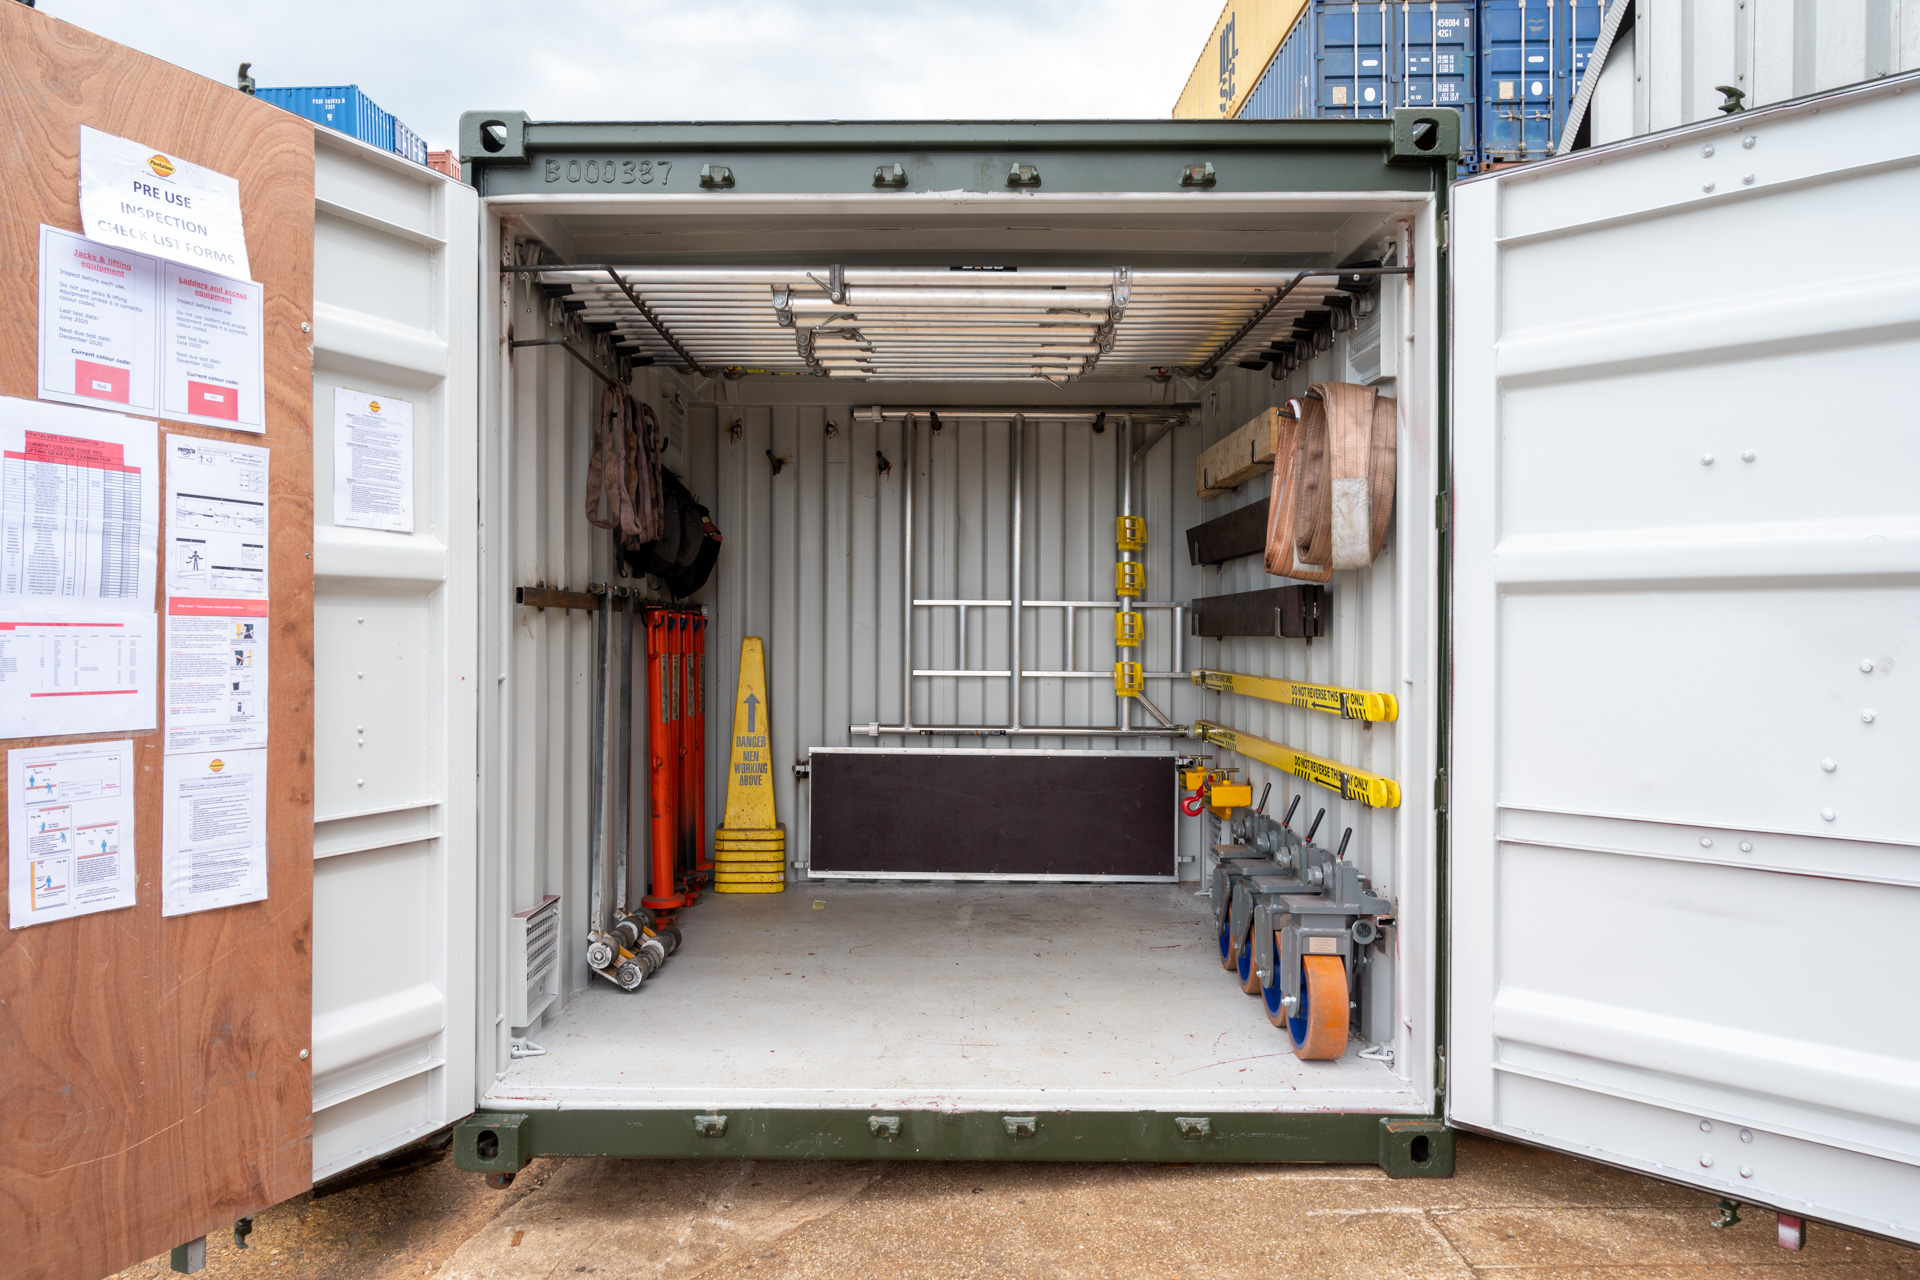 Do Shipping Containers Make Good Storage Sheds?